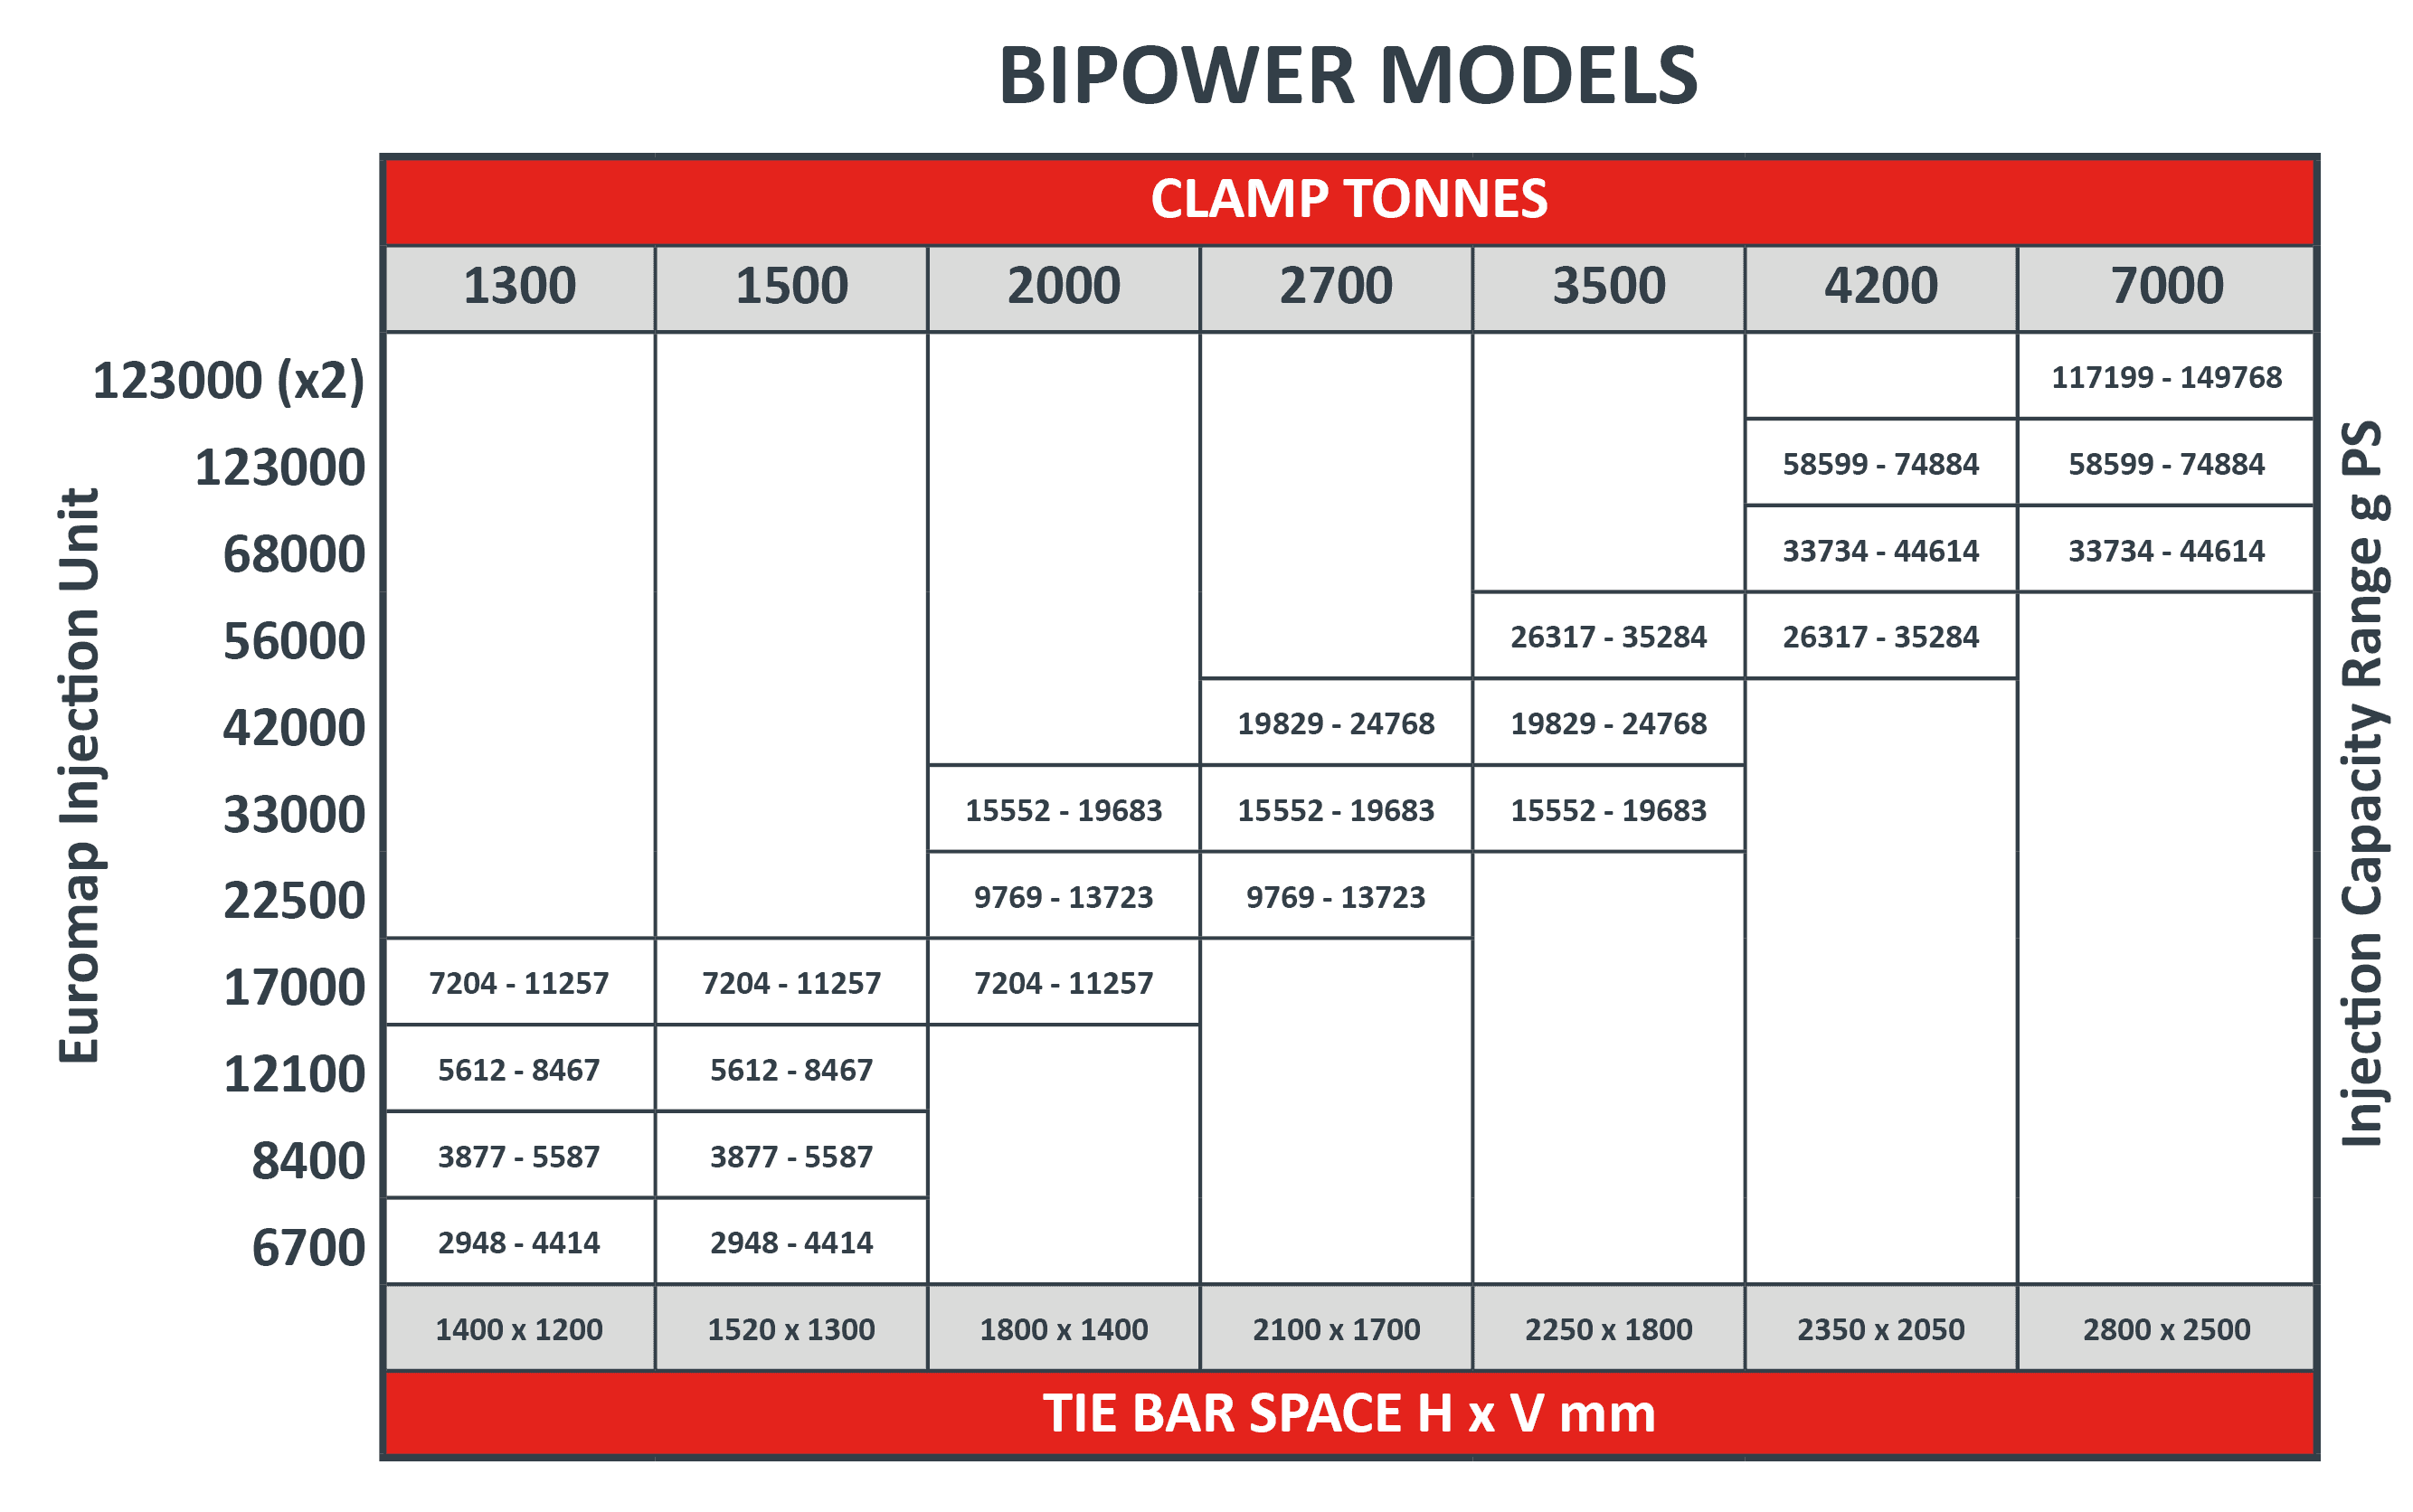 BIPOWER Two Platen injection moulding machine model specification sheet